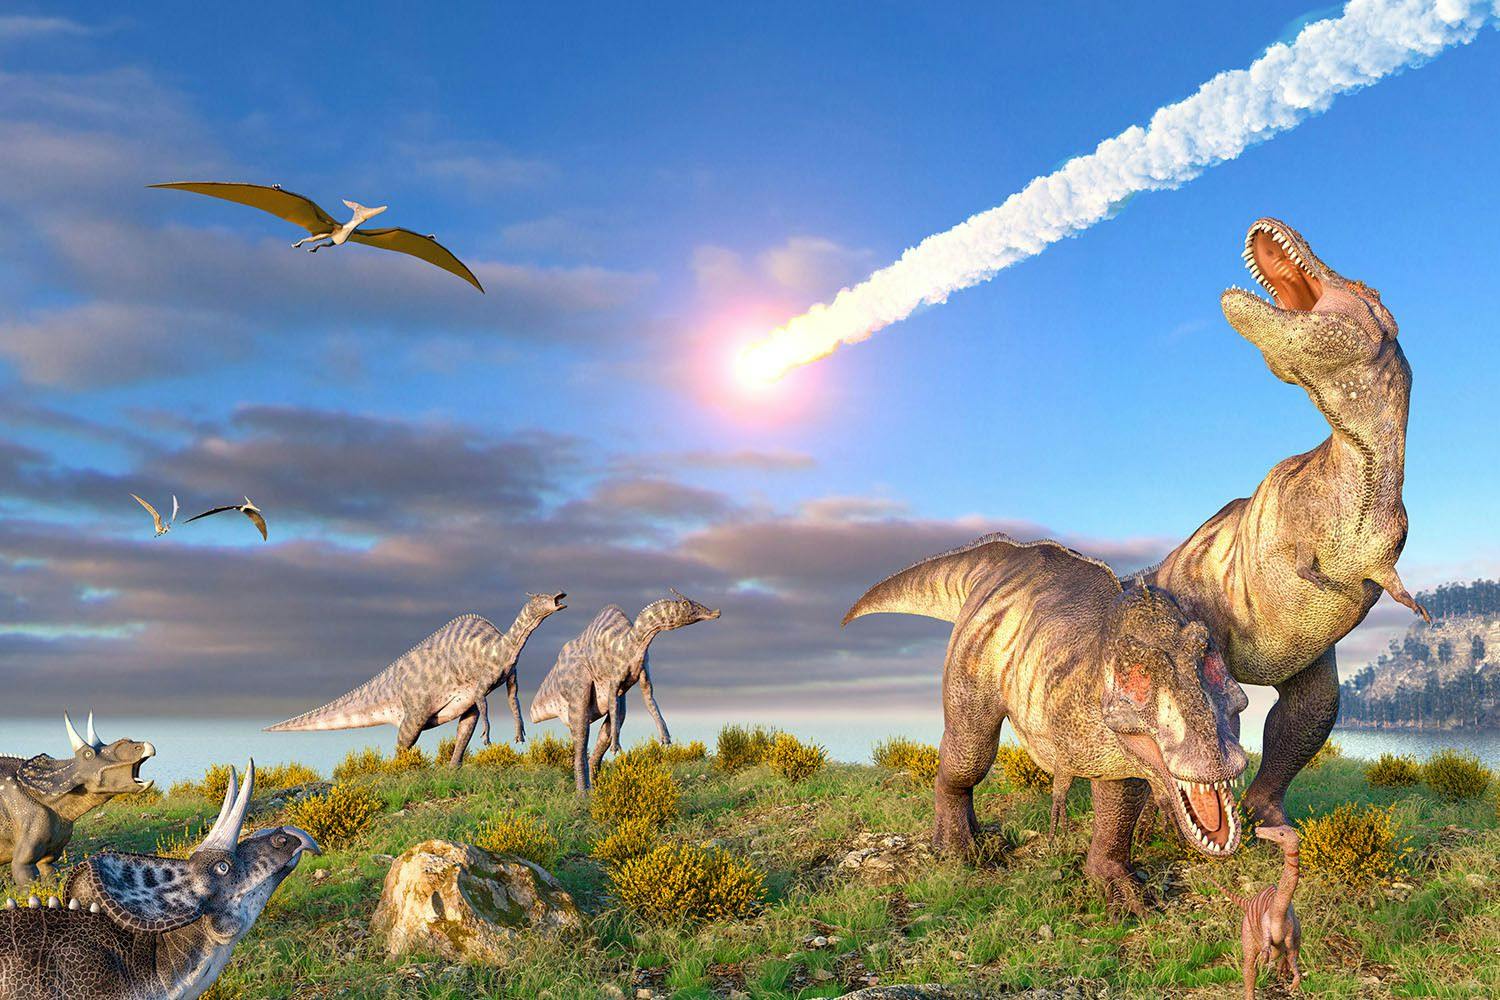 Dinosaurs watching an asteroid